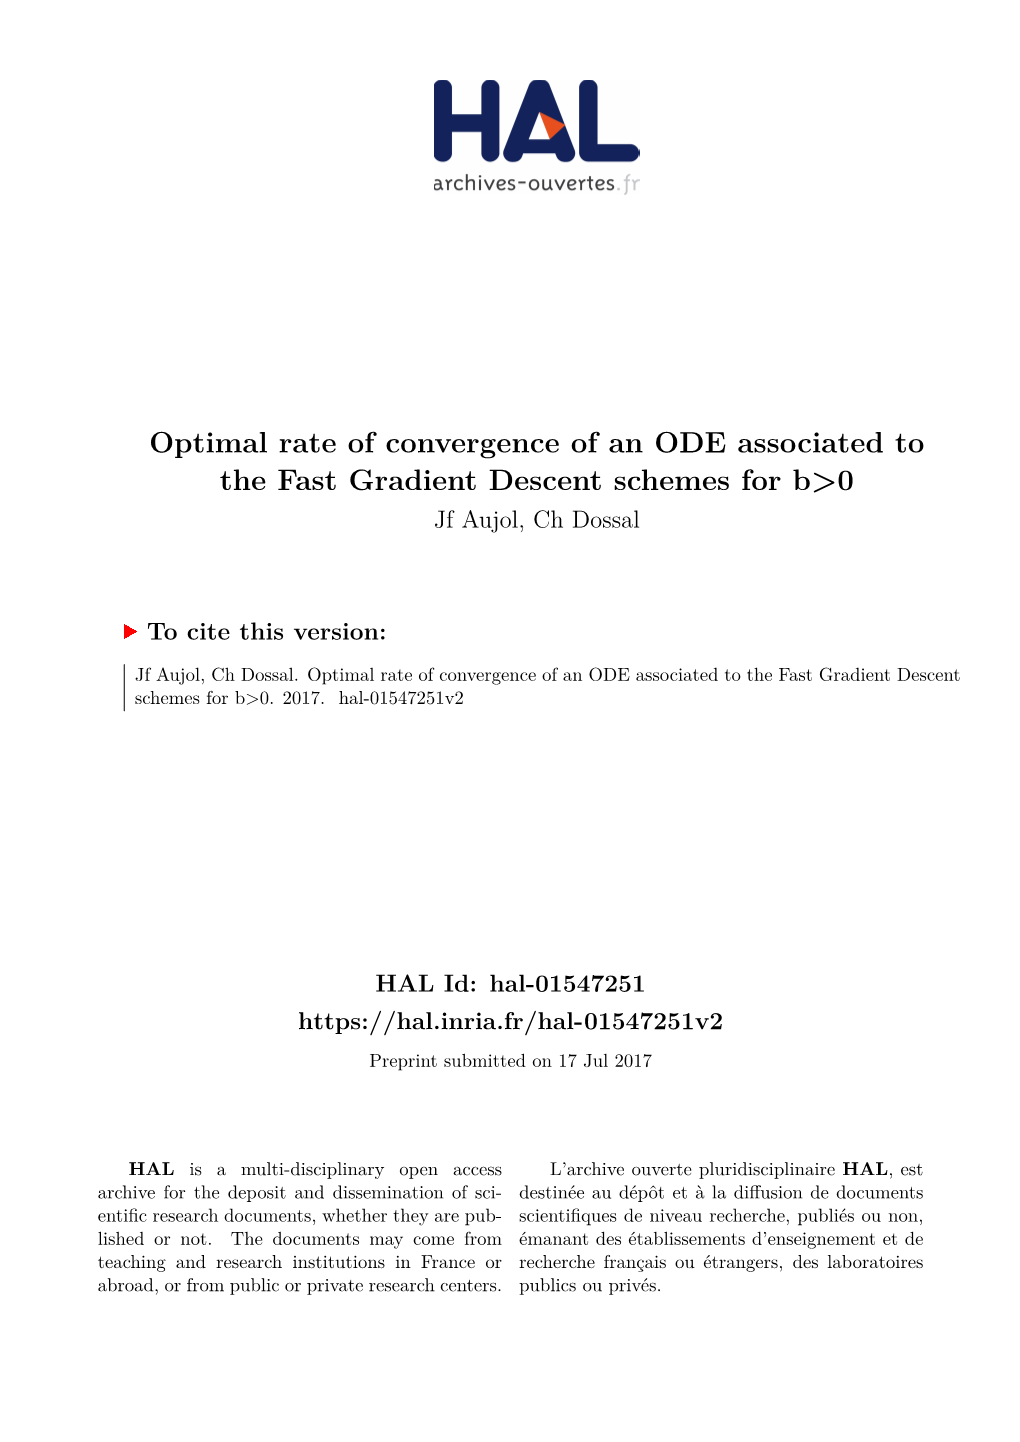 Optimal Rate of Convergence of an ODE Associated to the Fast Gradient Descent Schemes for B>0 Jf Aujol, Ch Dossal